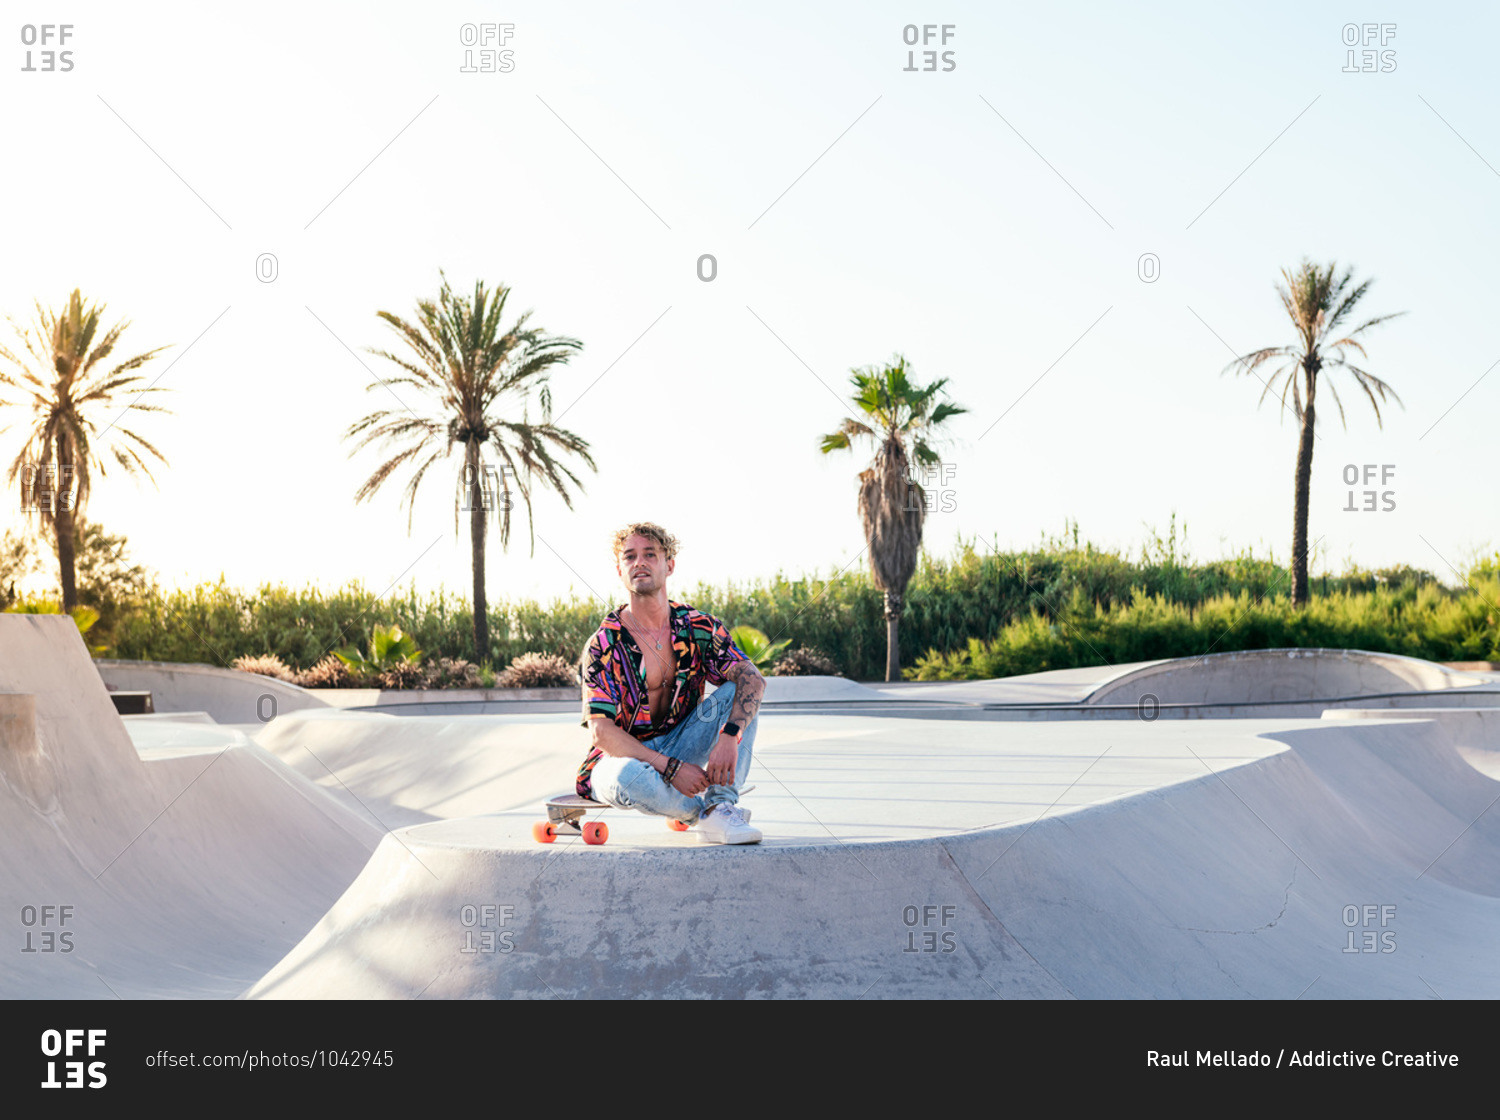 Low angle of young stylish male skater in colorful shirt and jeans sitting on skateboard while spending summer day in skatepark